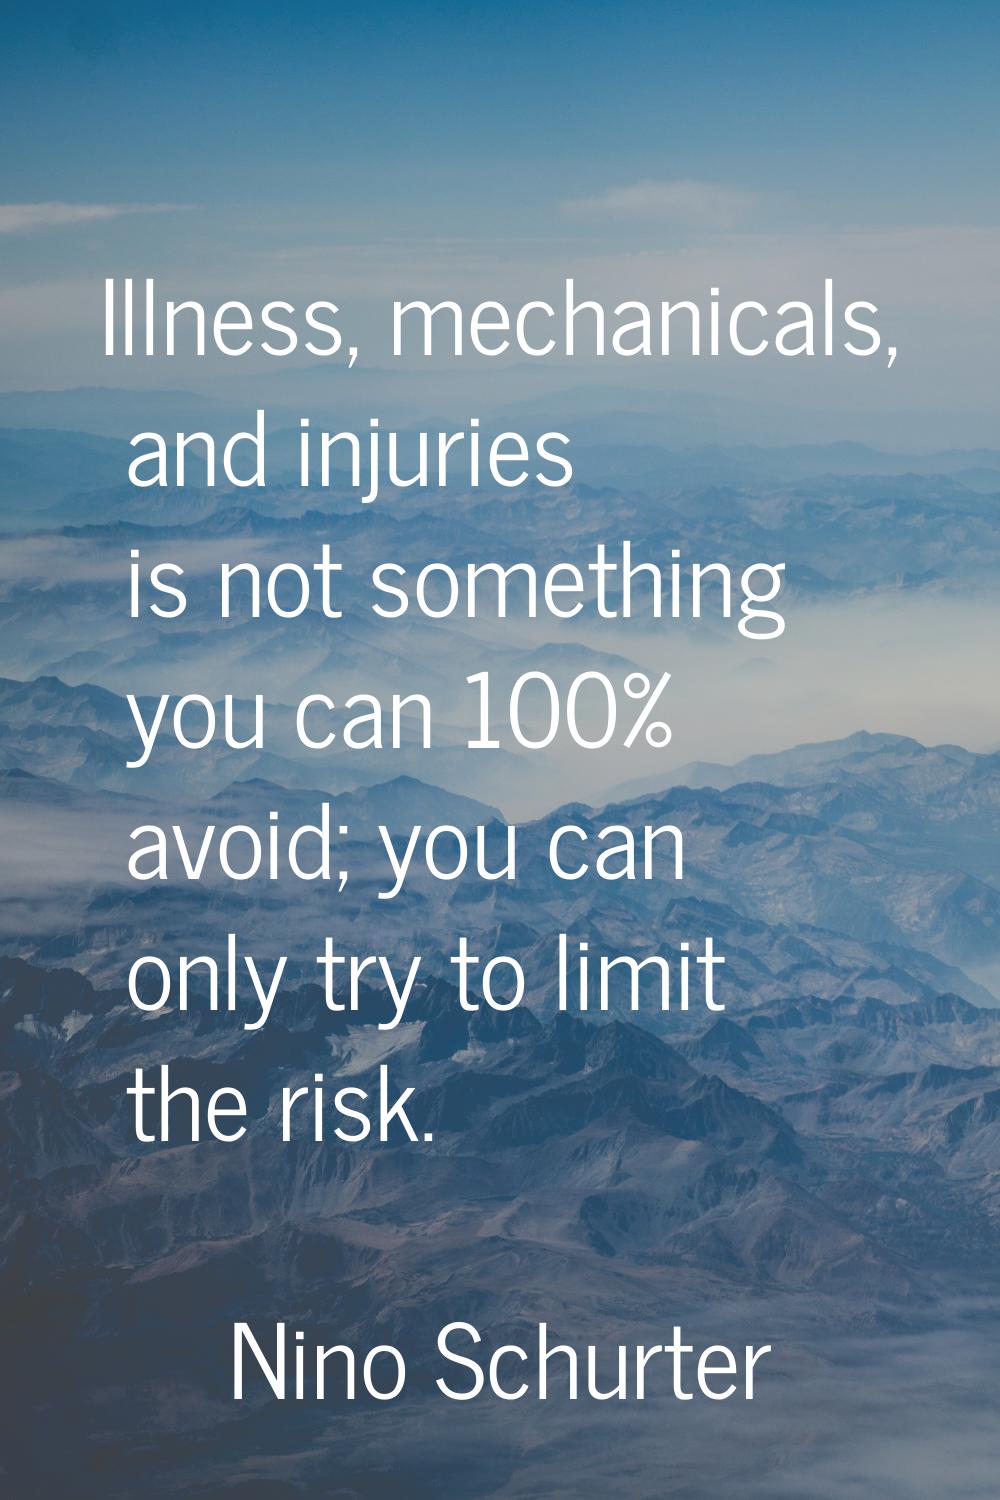 Illness, mechanicals, and injuries is not something you can 100% avoid; you can only try to limit t